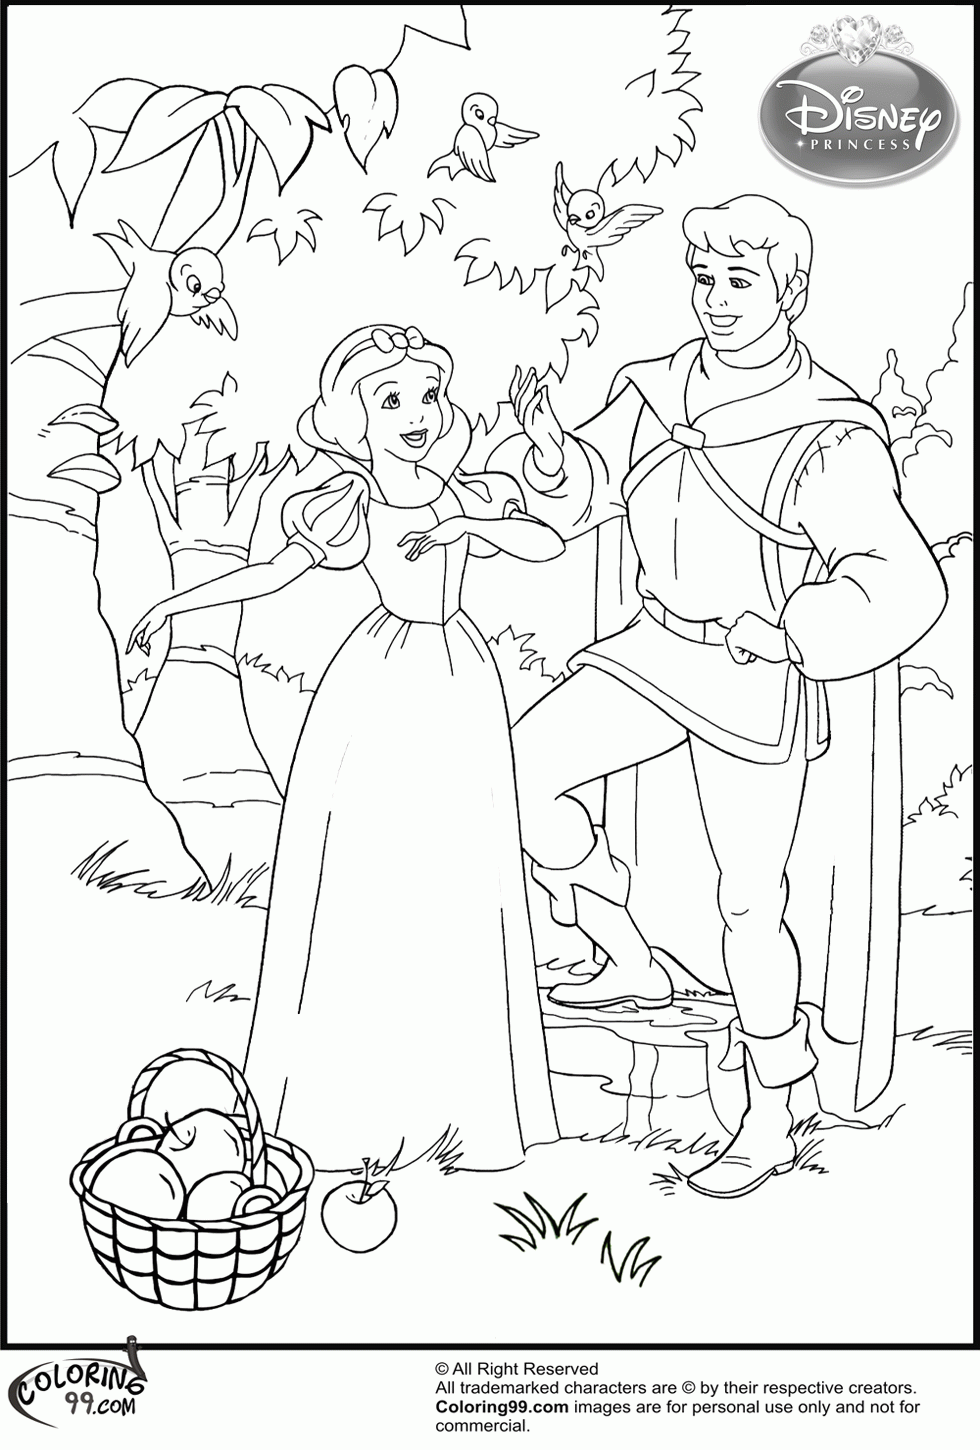 Snow White and The Prince Coloring Pages | Team colors